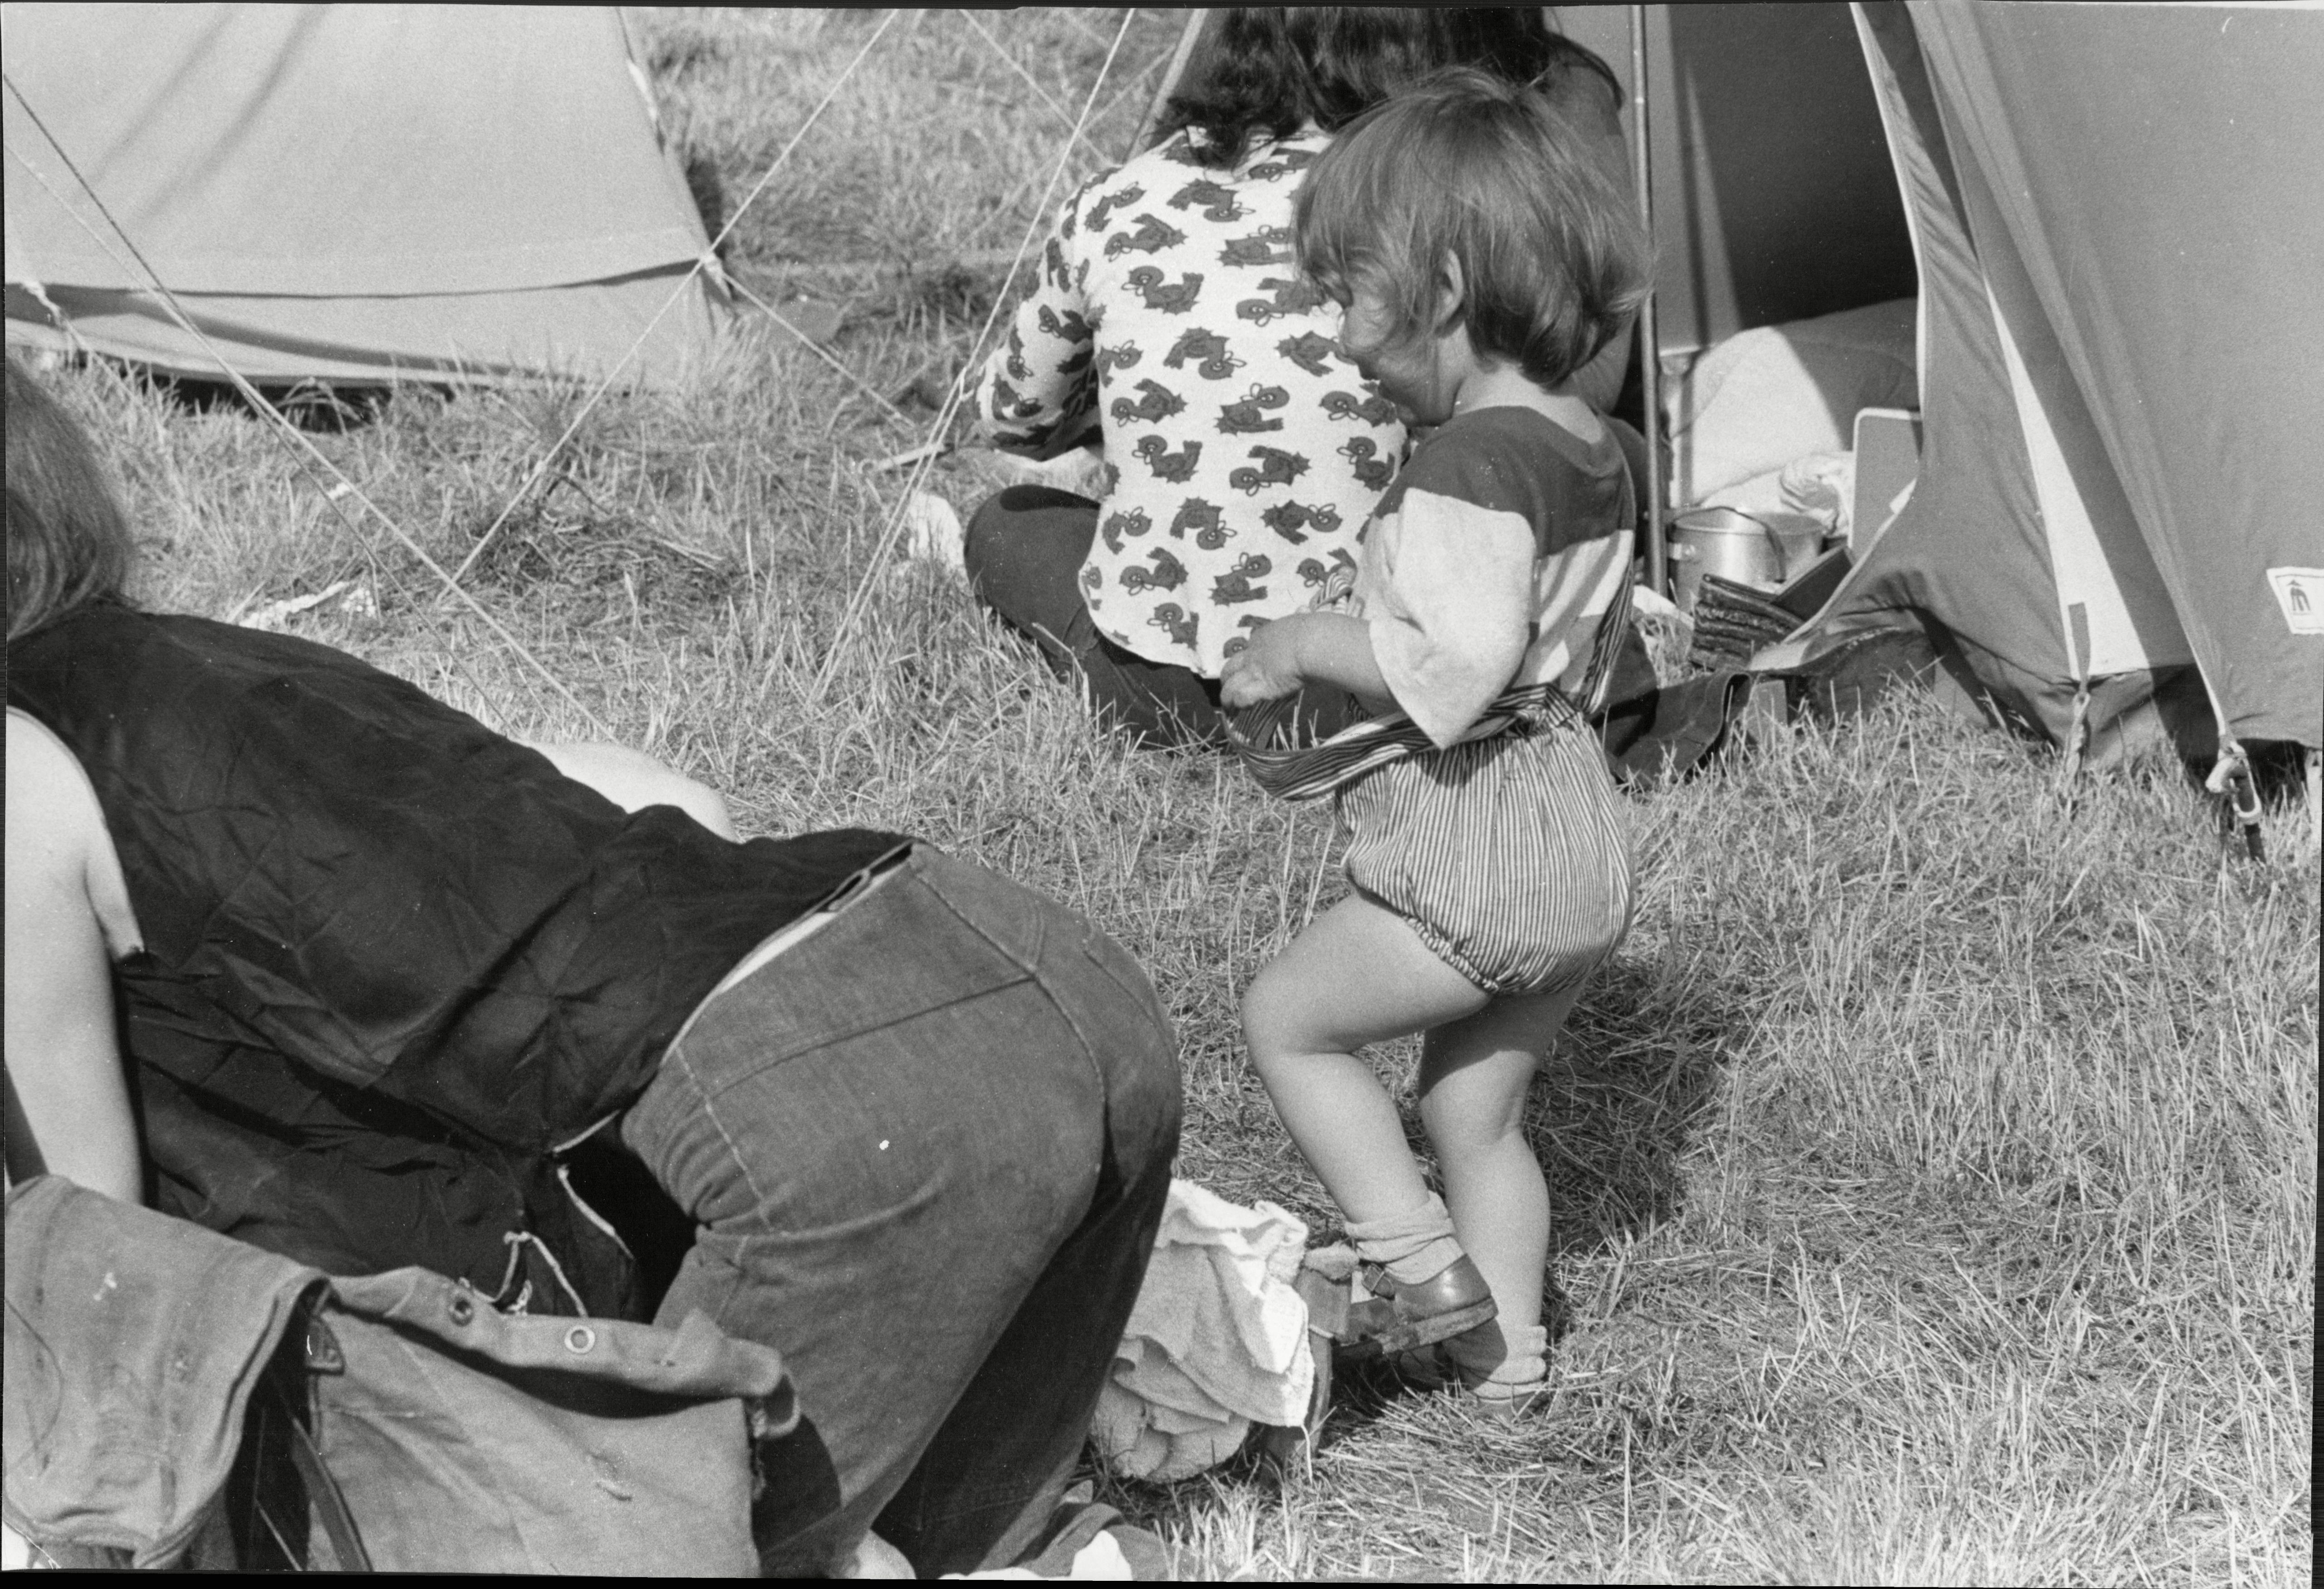 Photos Of The Reading Festival In The 1970s - Flashbak